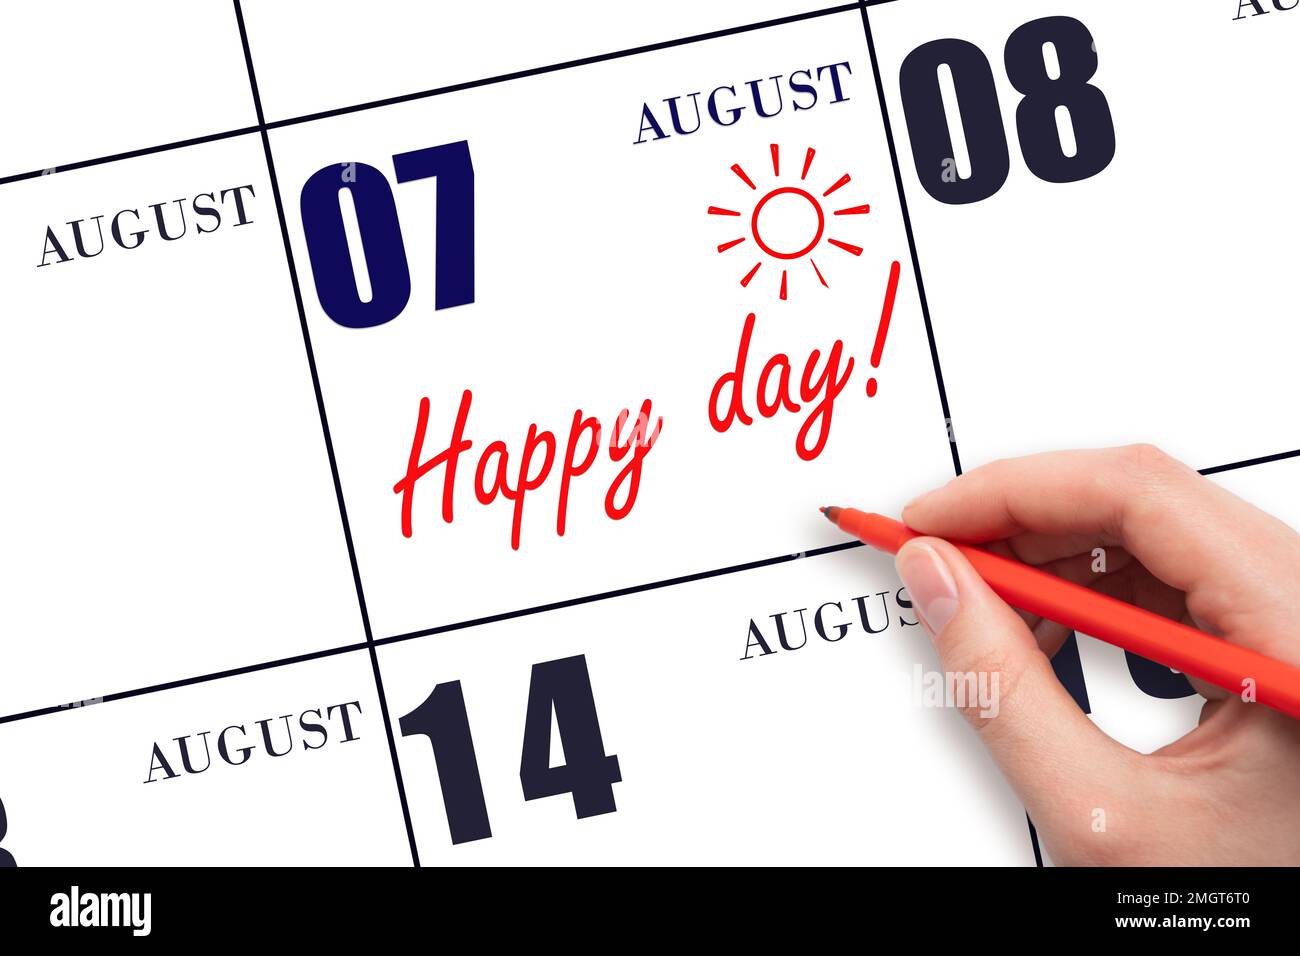 7th day of August. Hand writing the text HAPPY DAY and drawing the sun on the calendar date August 7. Save the date. Holiday. Motivation. Summer month Stock Photo